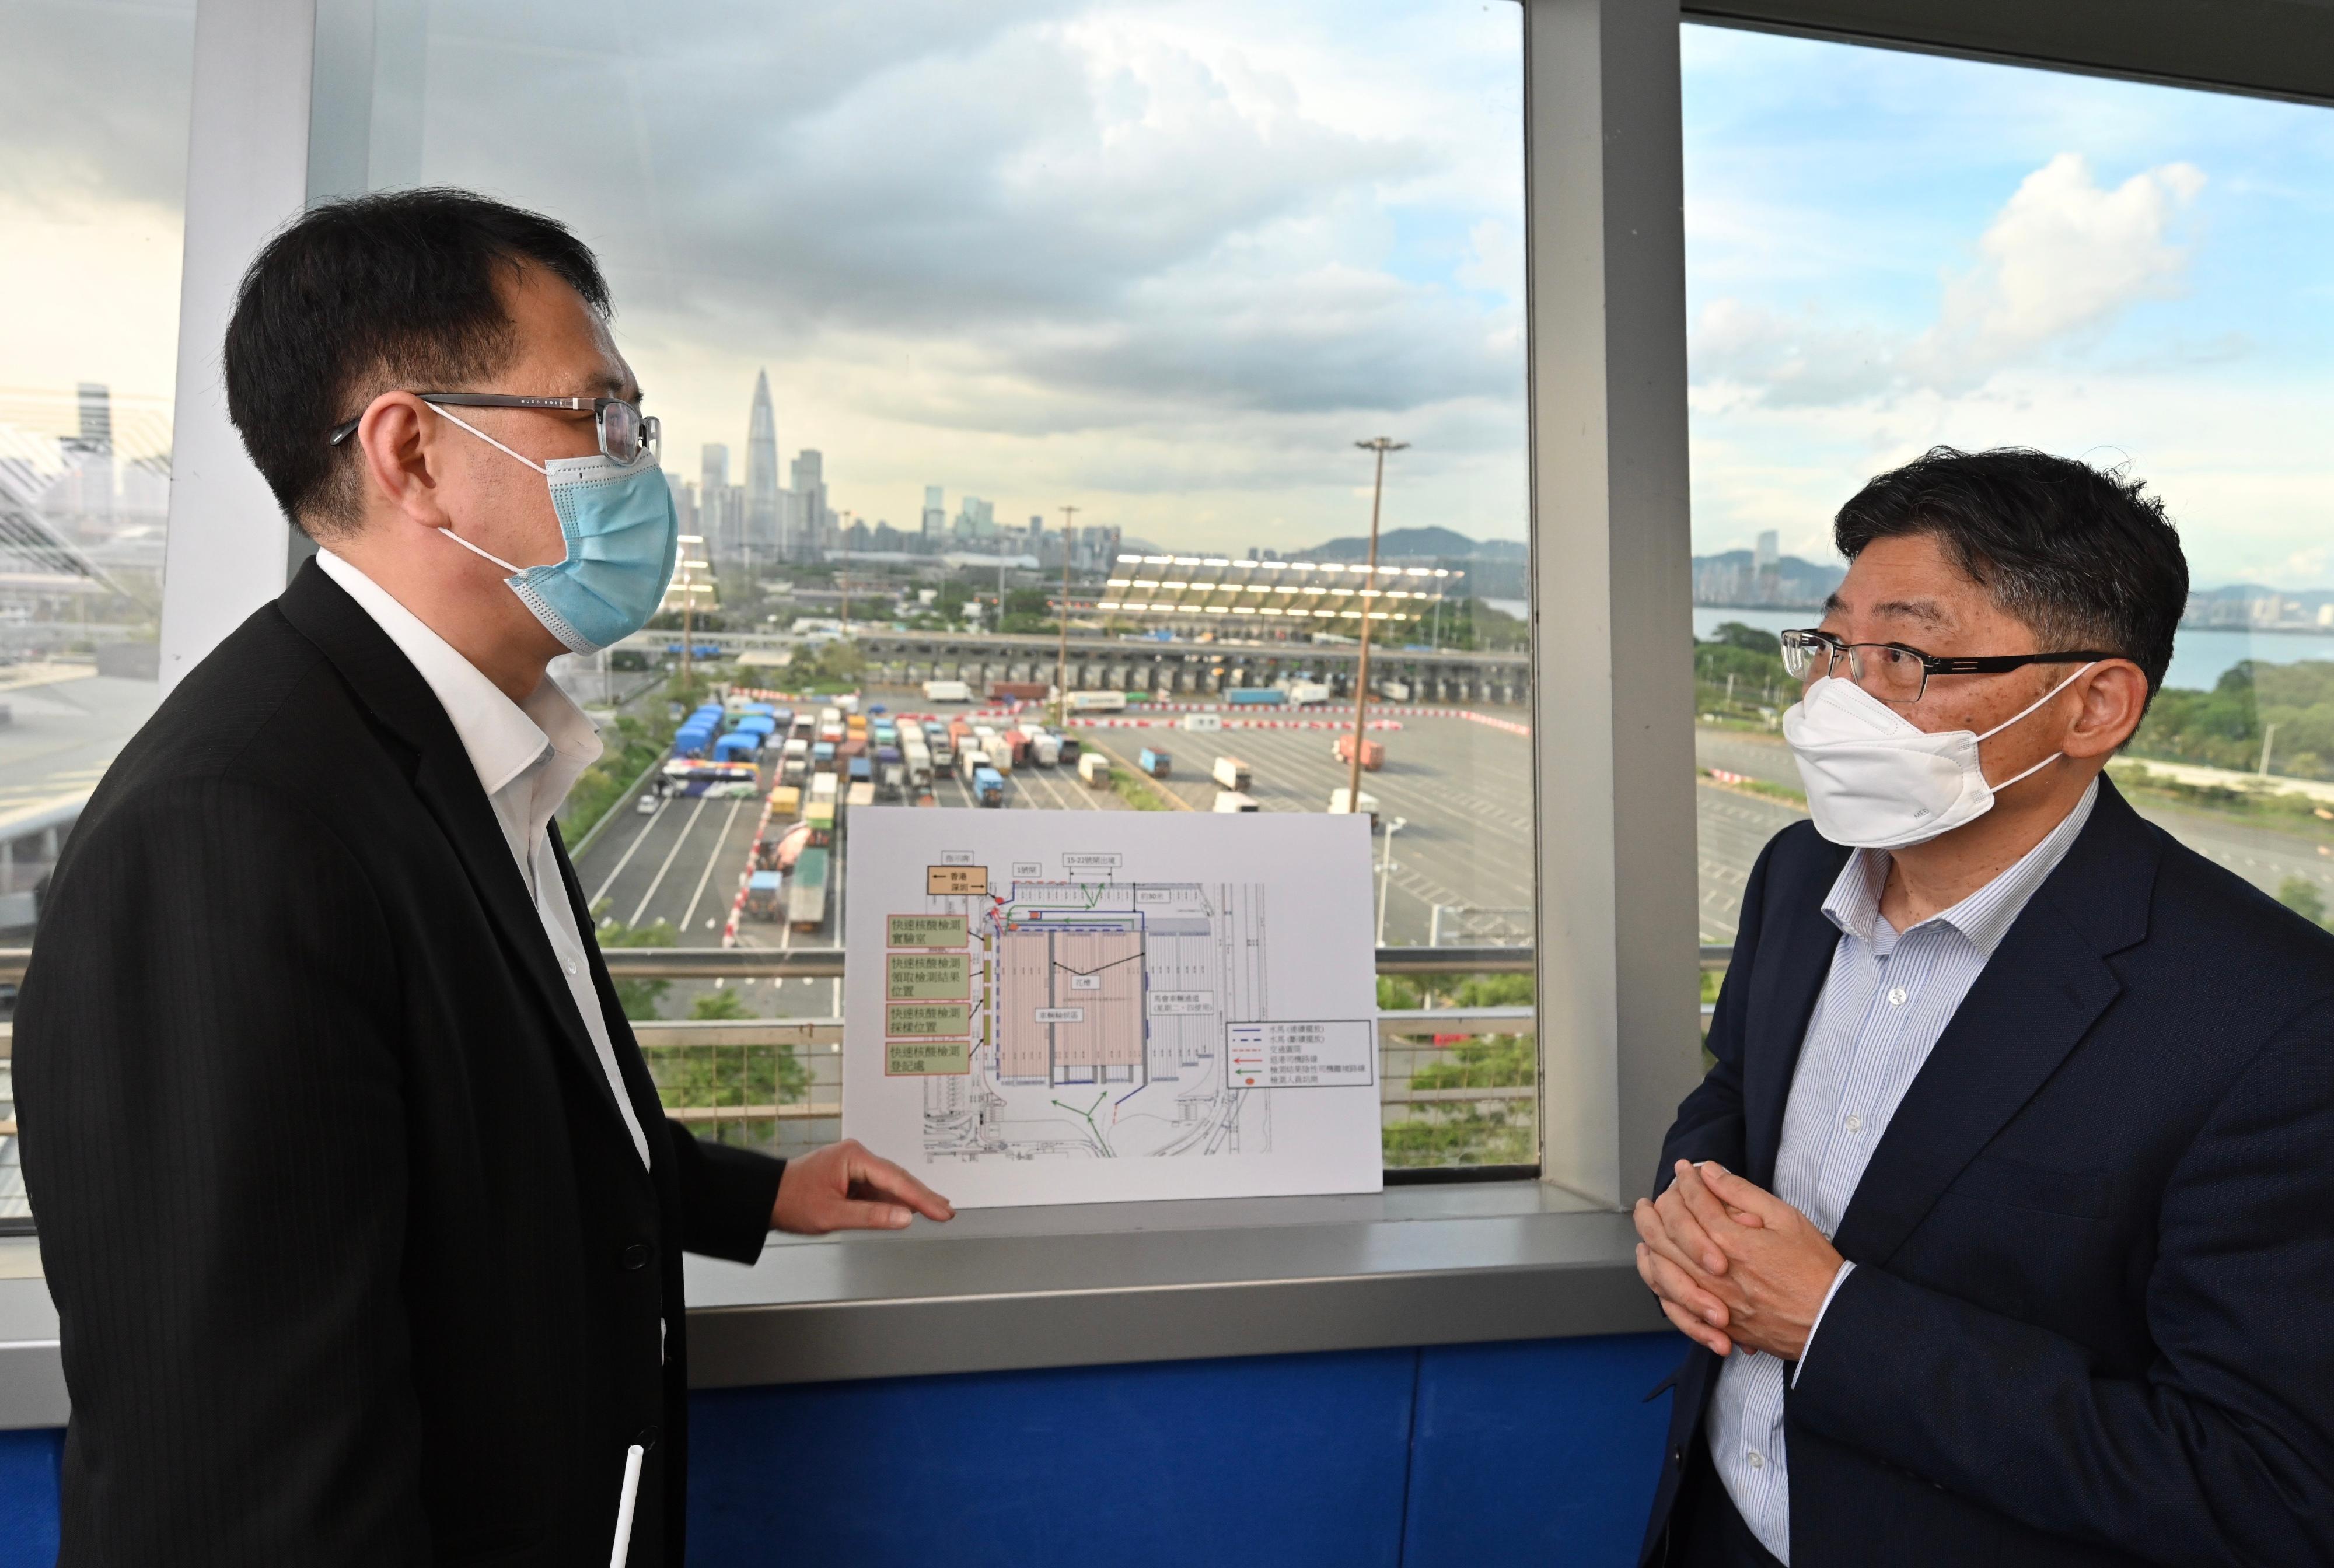 The Secretary for Transport and Logistics, Mr Lam Sai-hung, visited the Shenzhen Bay Port this afternoon (July 8) to inspect the operation of cross-boundary land transport of goods. Photo shows Mr Lam (right) being briefed by Principal Transport Officer (New Territories) of the Transport Department Mr Patrick Ng (left), on the current operation of cross boundary land transport of goods at the land boundary control points in Hong Kong.